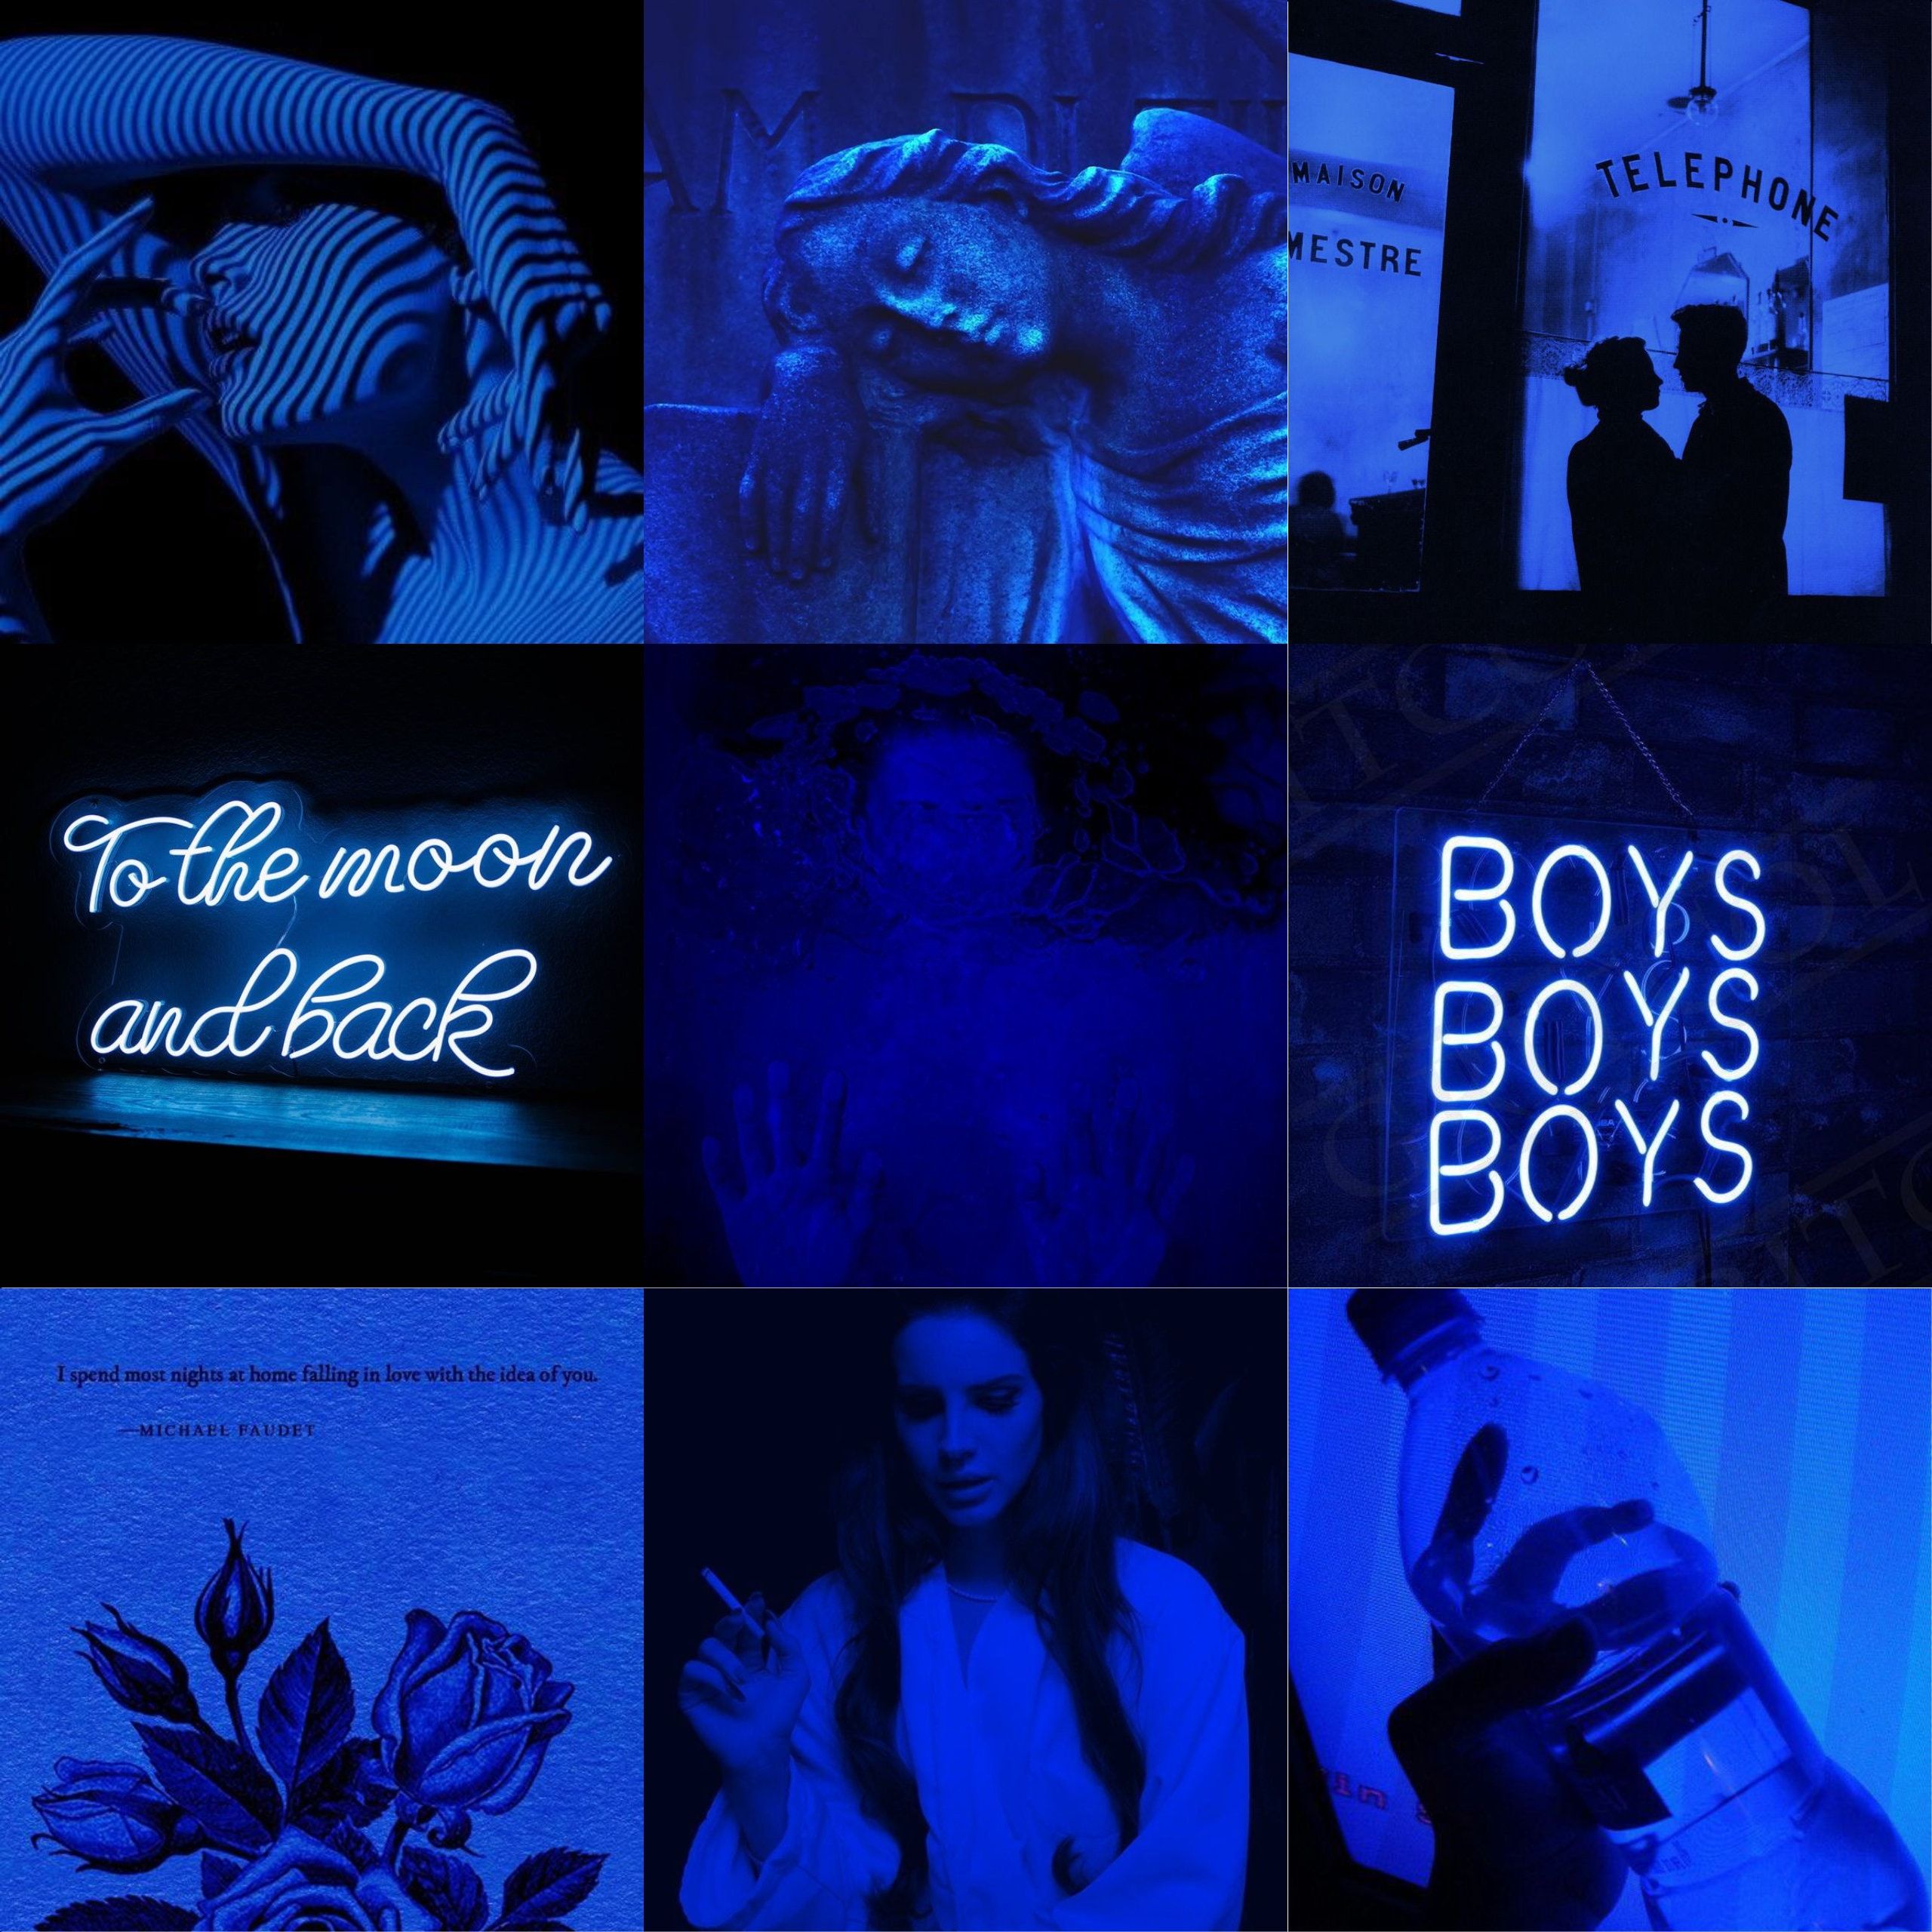 Aesthetic background with blue and black themes. - Neon blue, dark blue, indigo